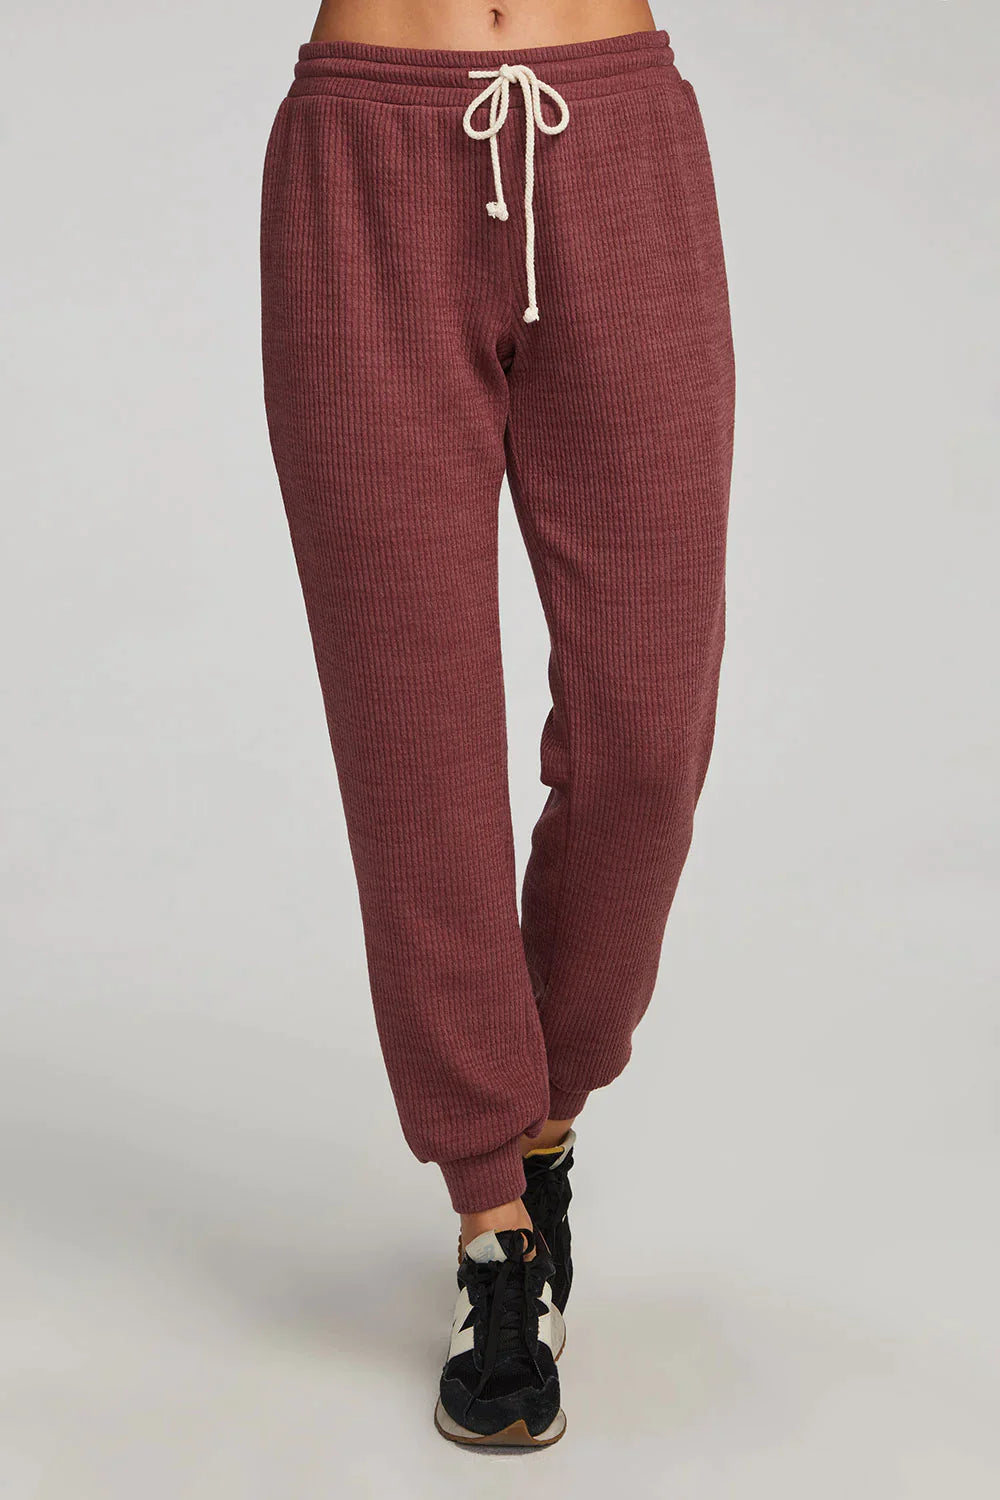 The Ribbed Pull On Jogger Pant by Saltwater Luxe - Mulberry – THE SKINNY